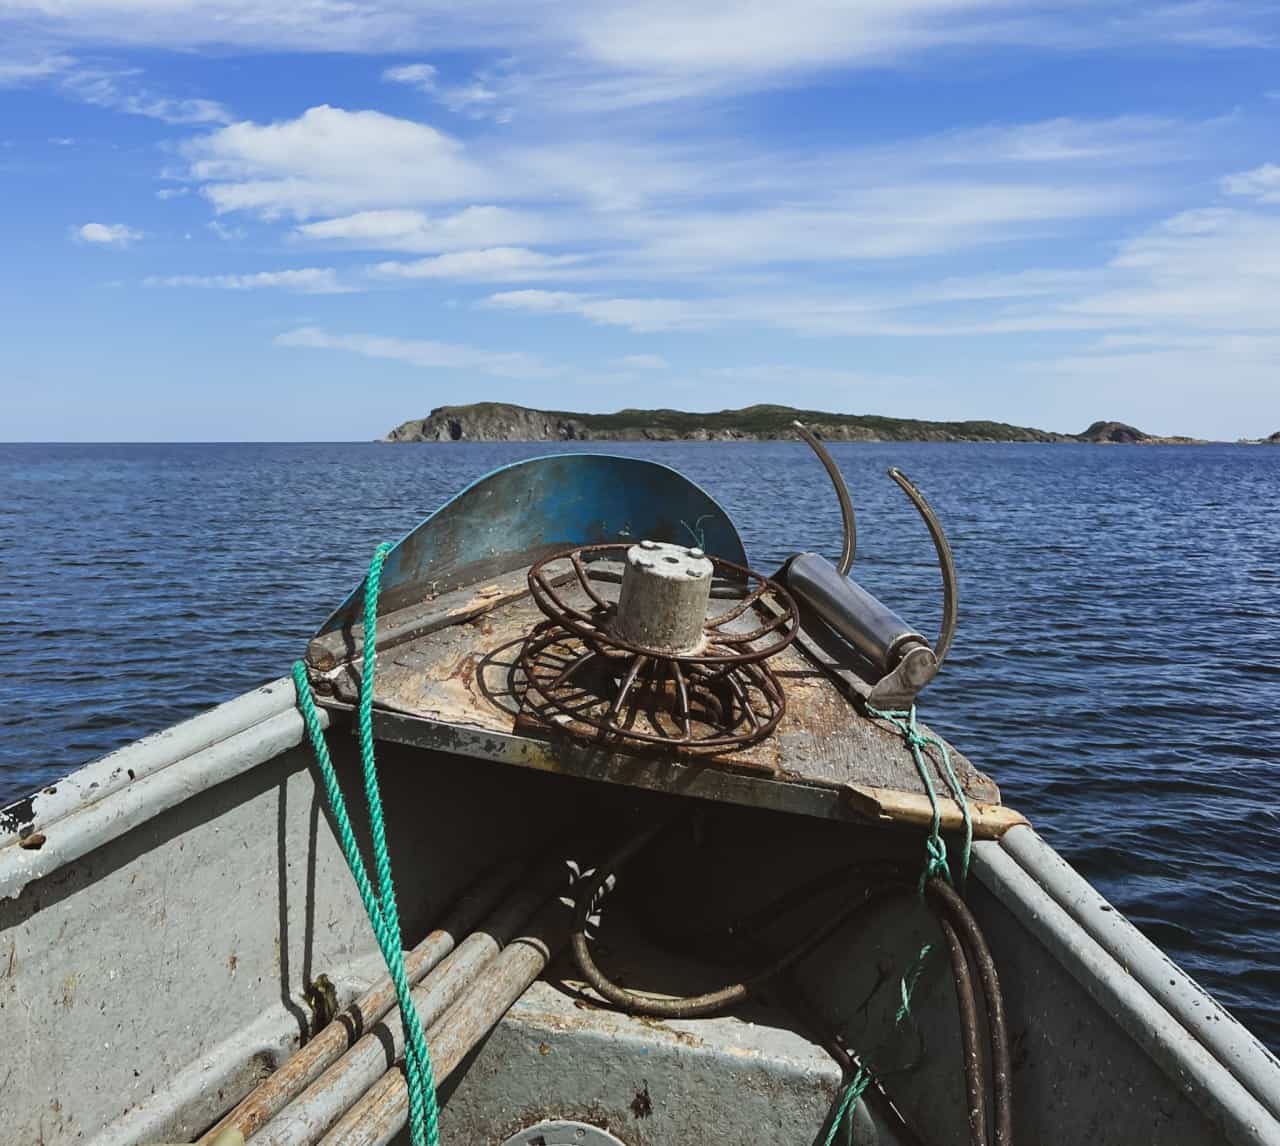 Twillingate Newfoundland Boat Ride in the Harbour  - I love boating in NL and I was excited to get out for a quick ride around the bay in a traditional open fishing boat with a local fisherman. 